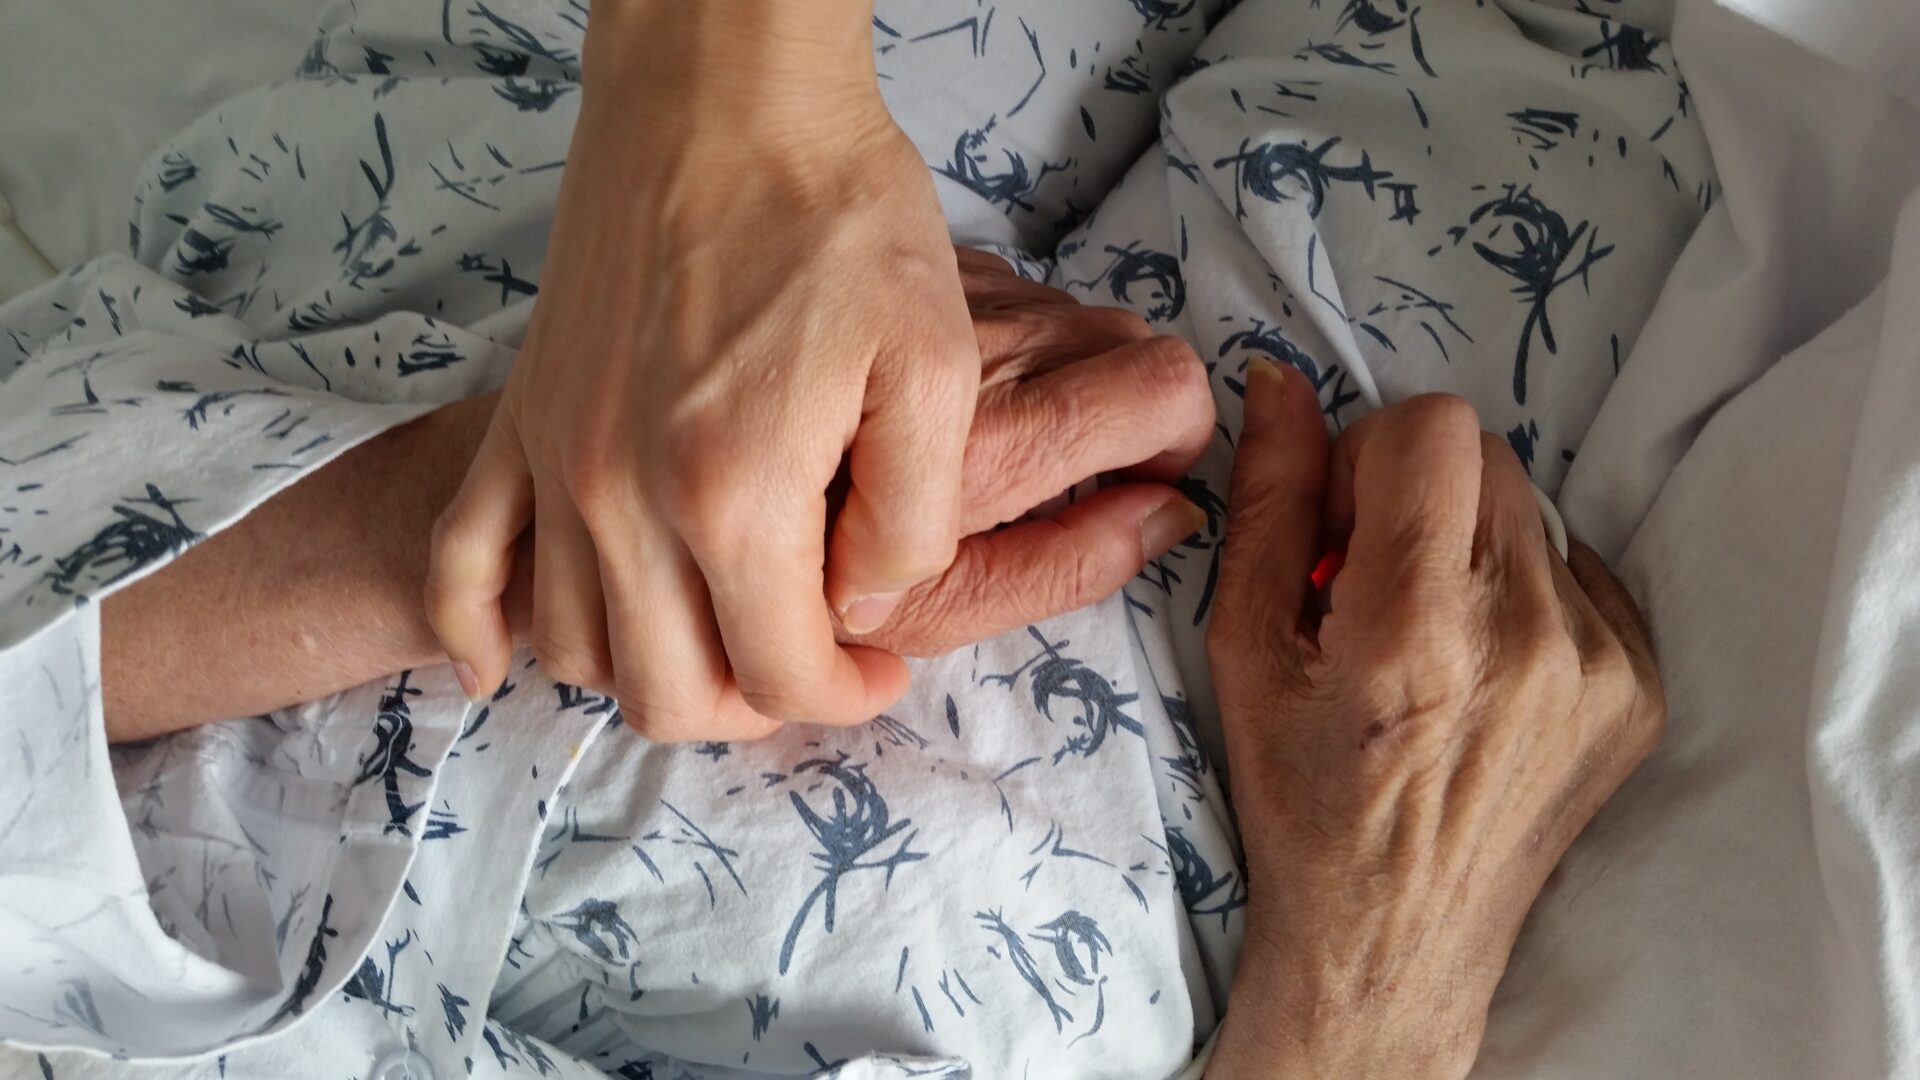 Supporting someone through end of life. Holding their hand for support.